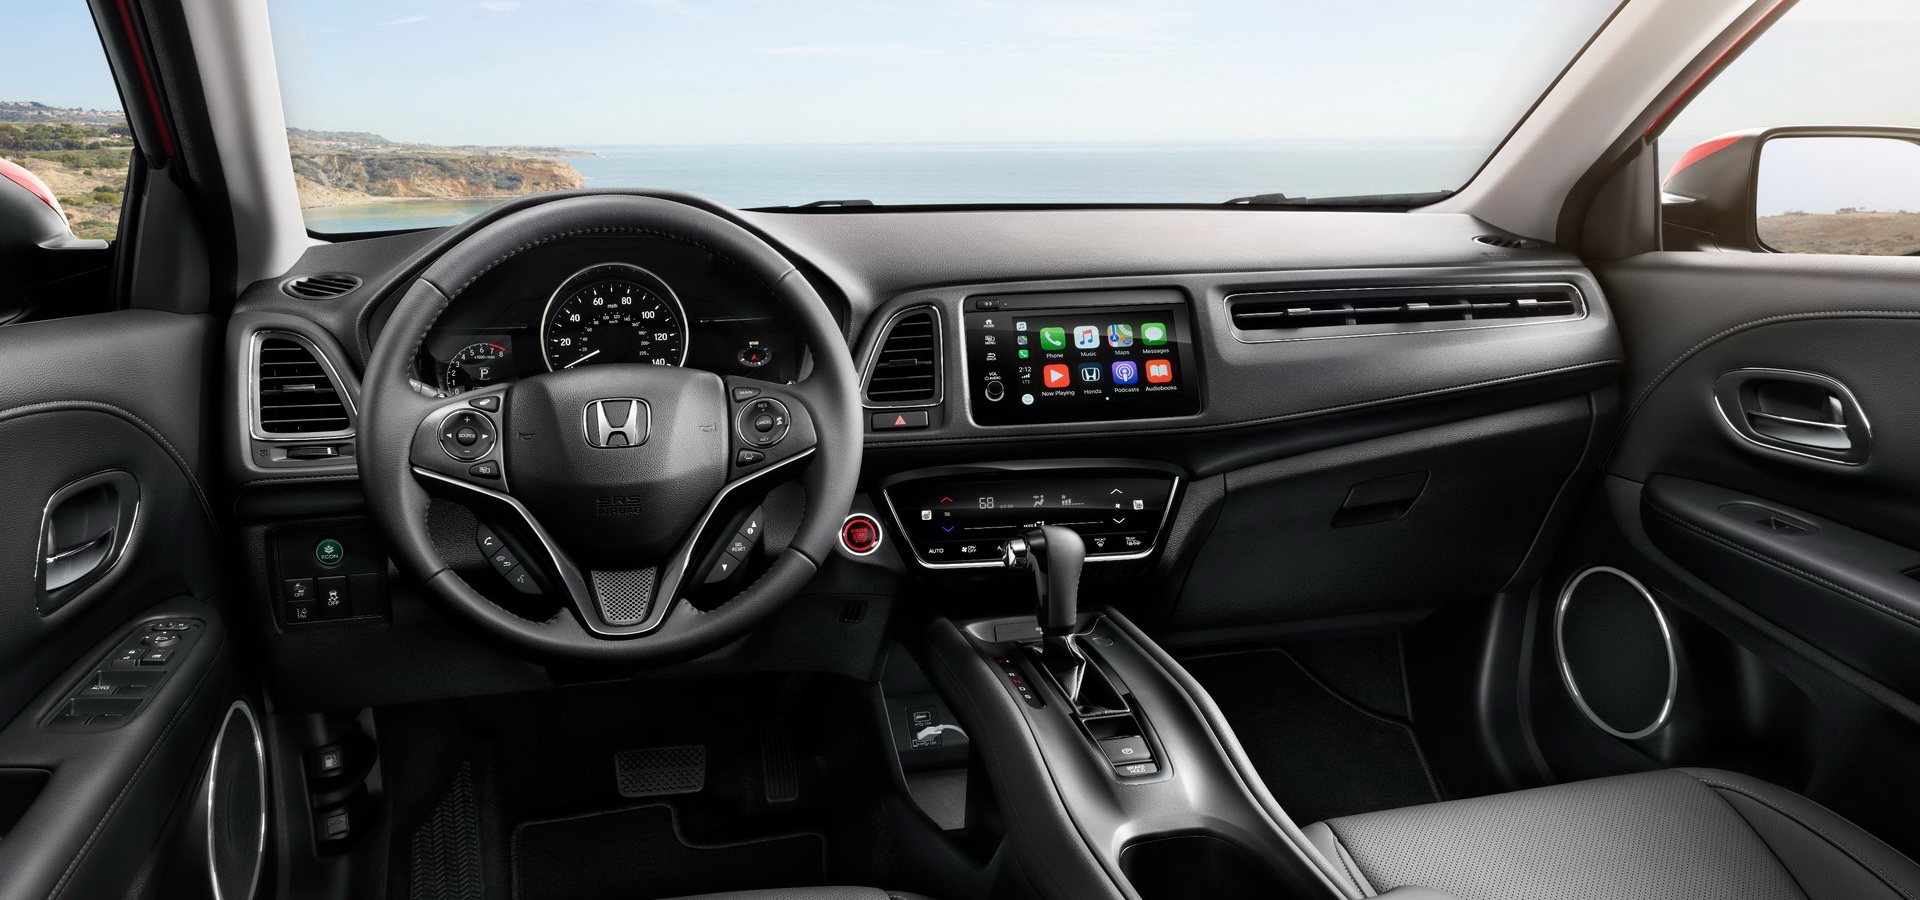 2019 Honda Hr V And Pilot Gain Updated Styling And New Tech